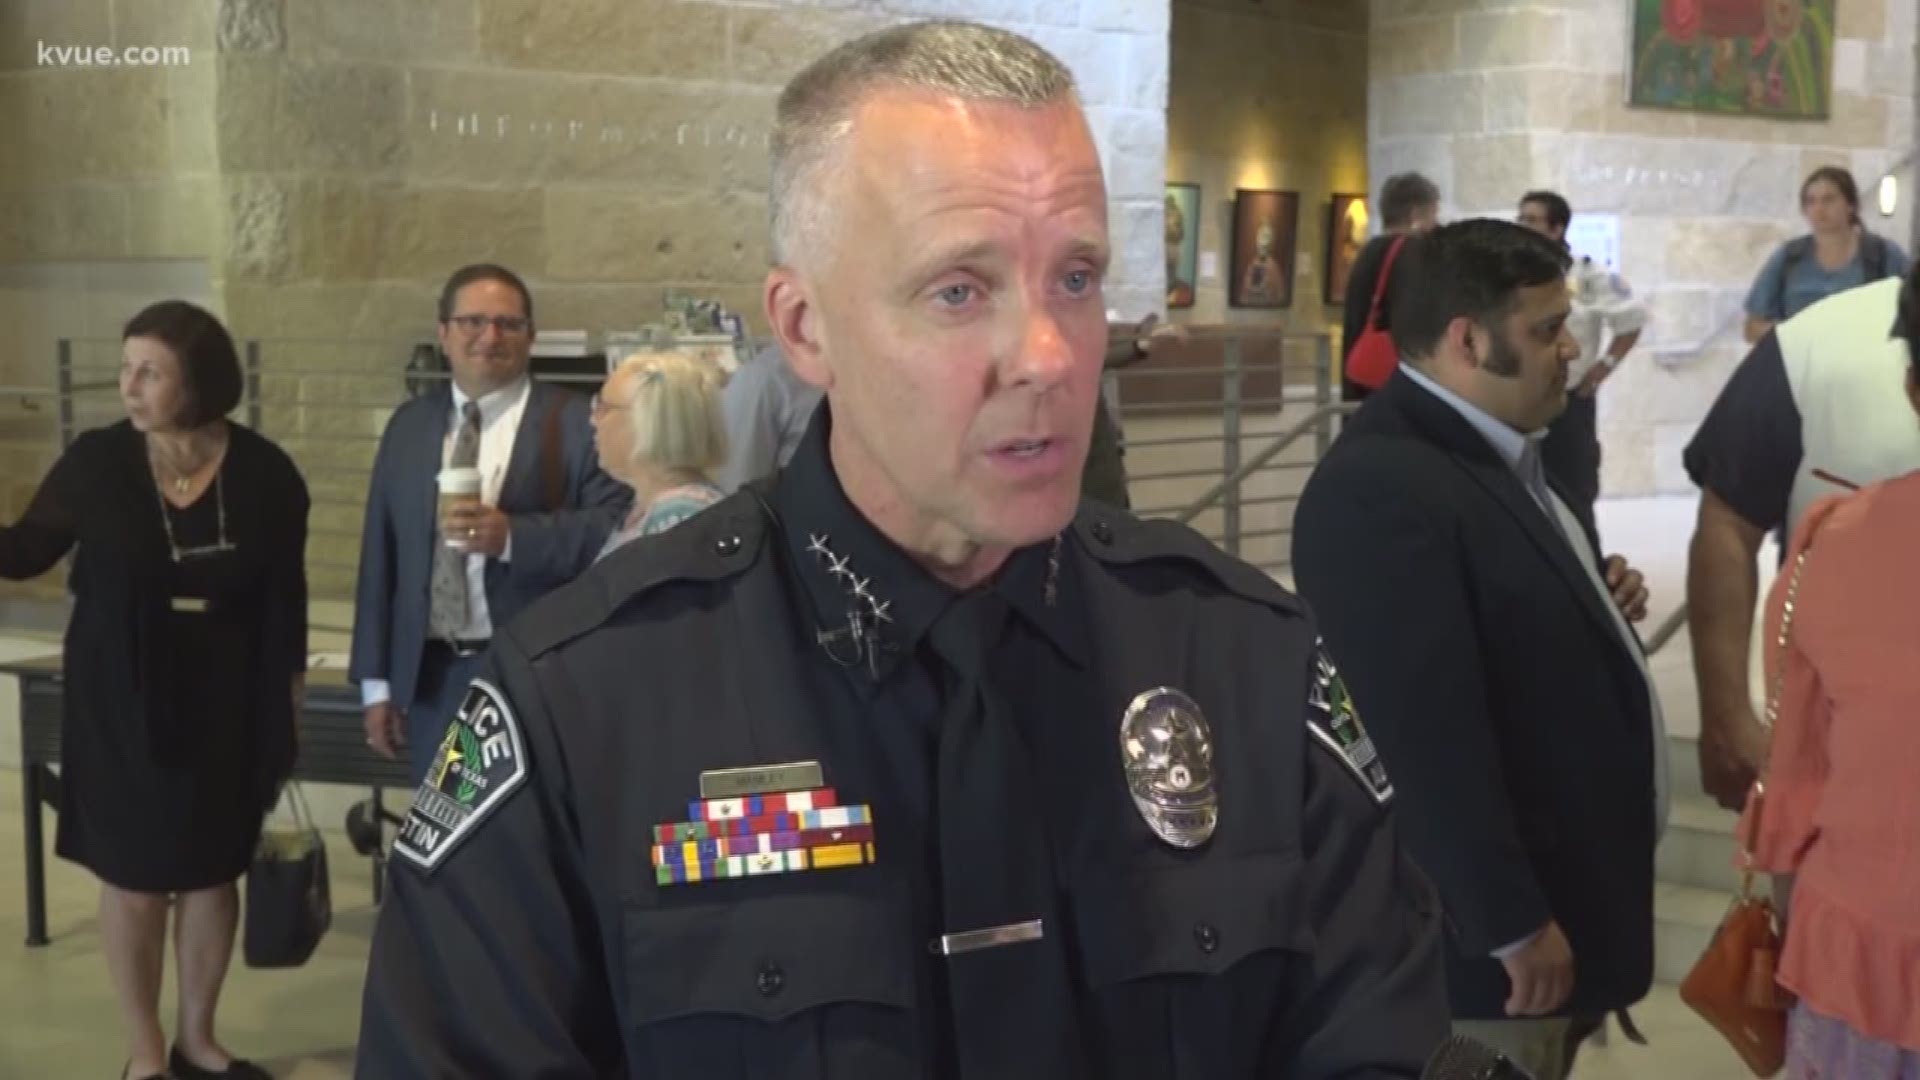 Brian Manley is now officially the permanent police chief of the Austin Police Department.